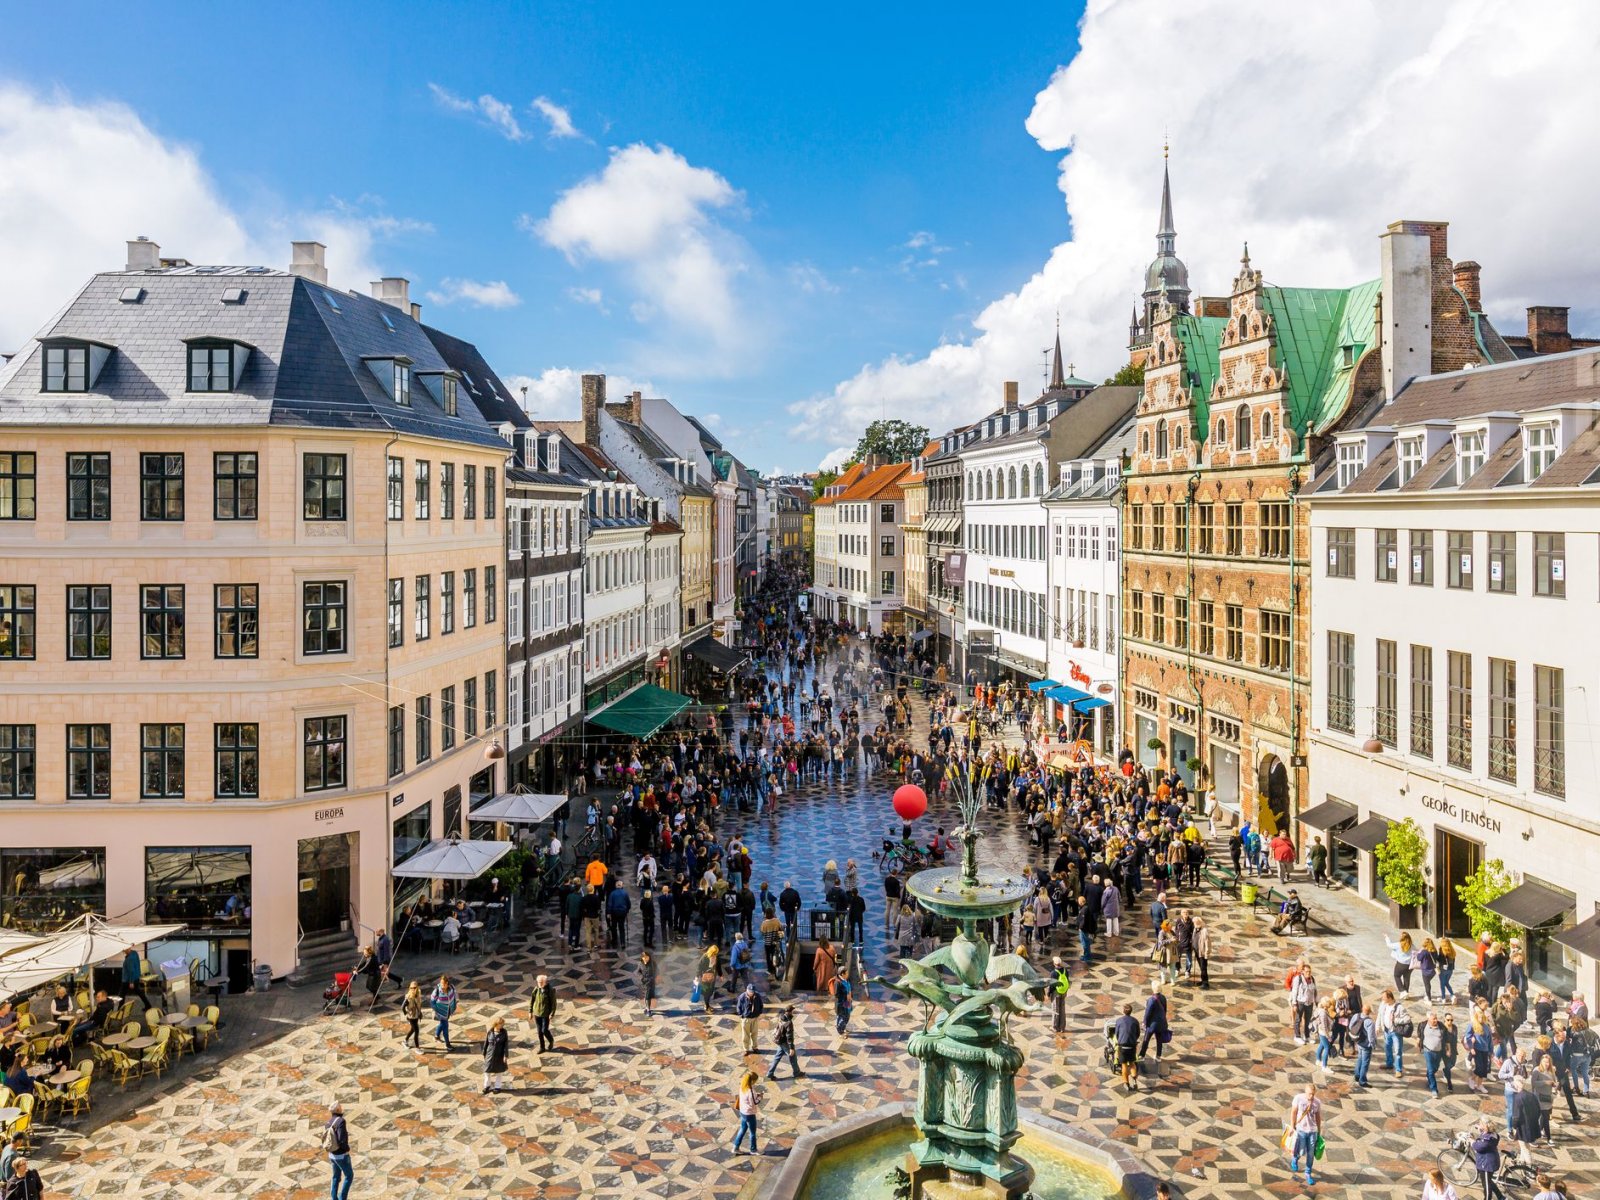 aerial-view-of-shopping-street-and-main-city-square-in-copenhagen-old-town--denmark-1137026486...jpg